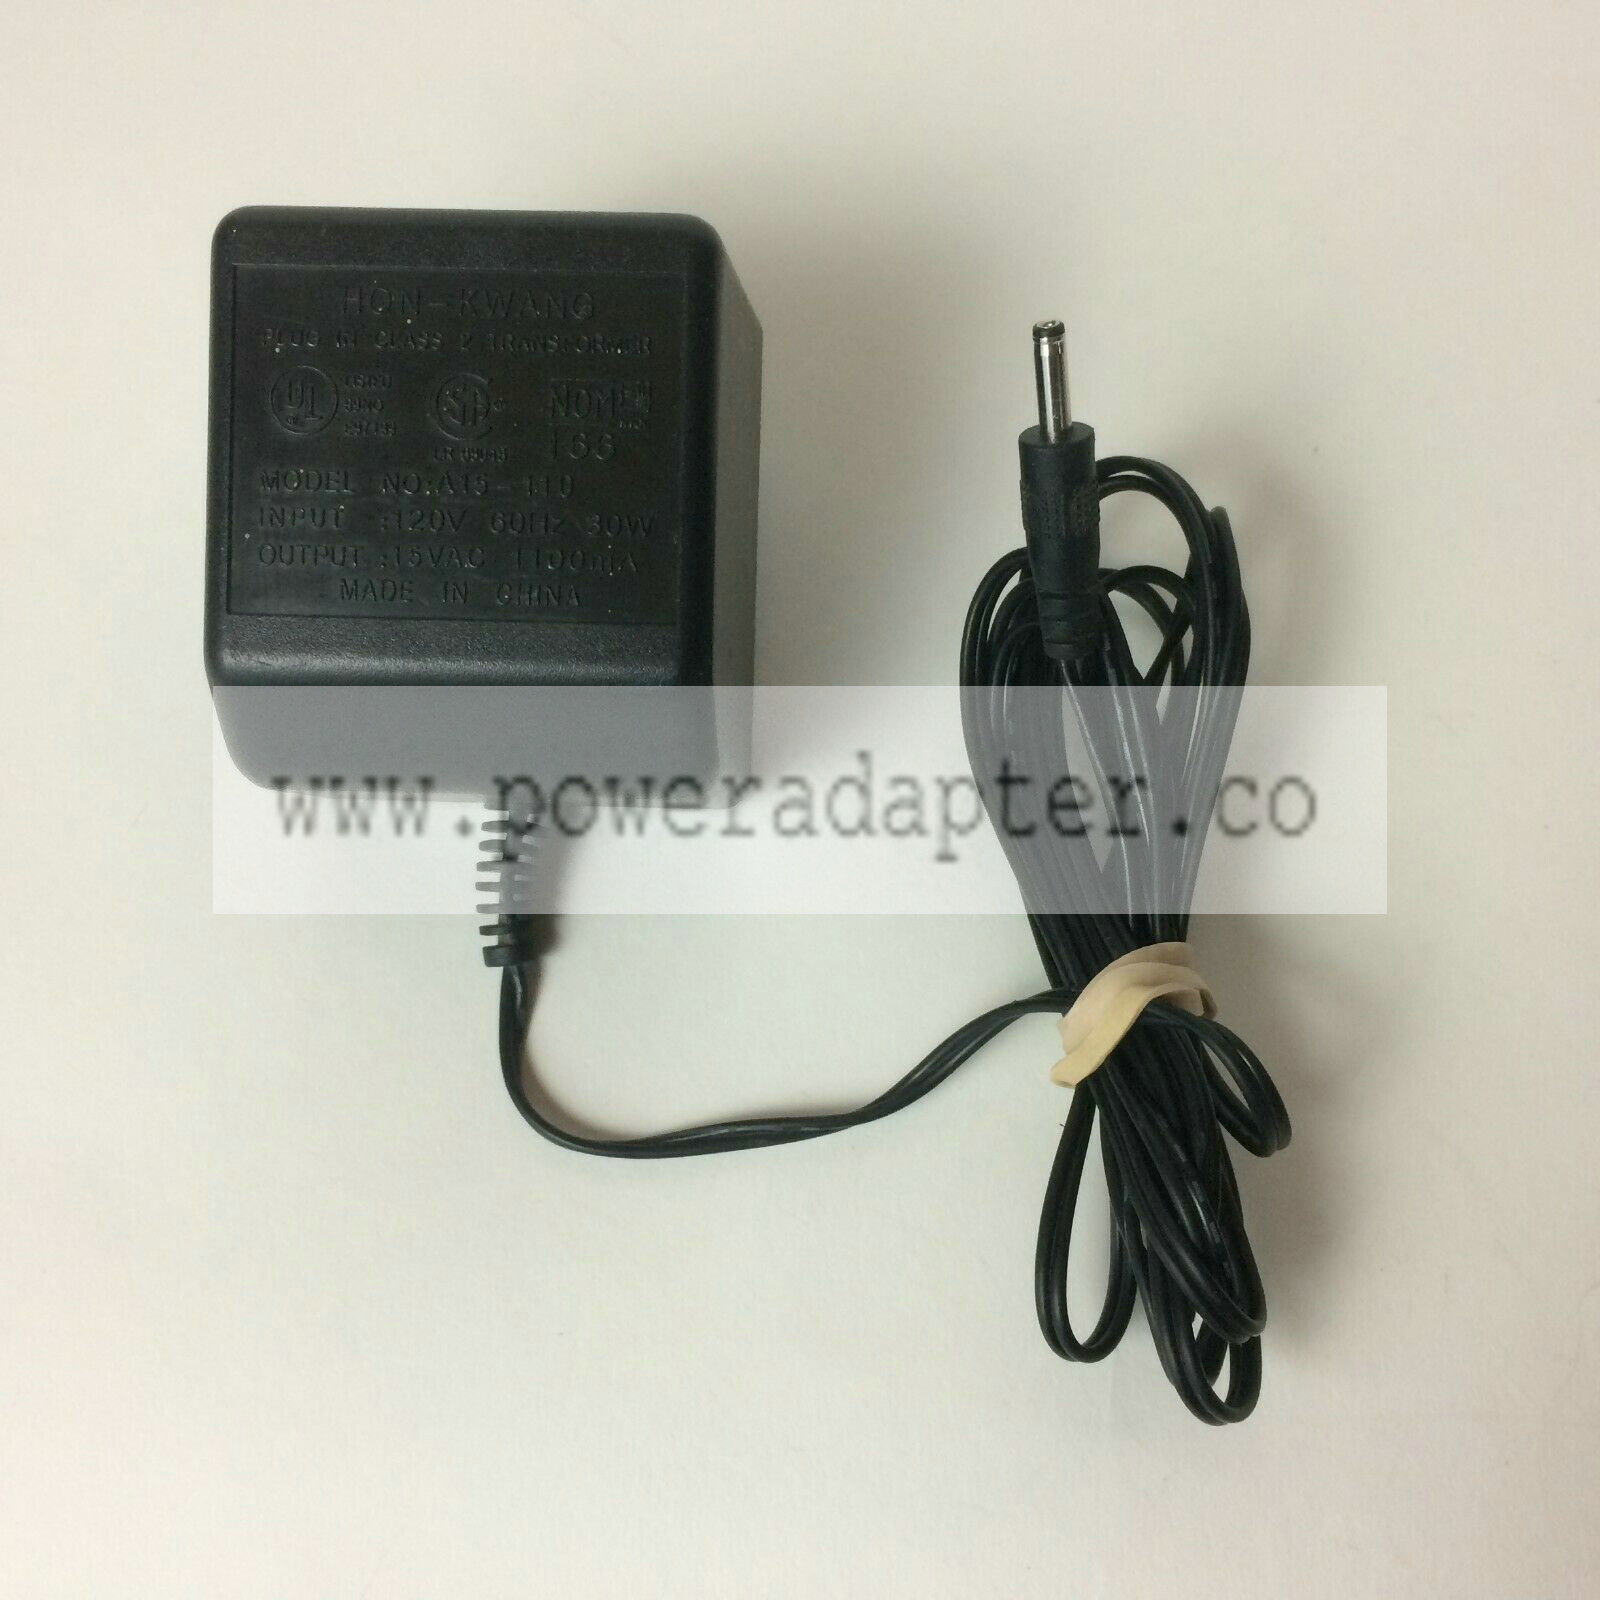 Hon Kwang Power Adapter Charger AC Supply 15V AC 1100mA Class 2 Model # A115-110 MPN: A15-110 Modified Item: No Outp